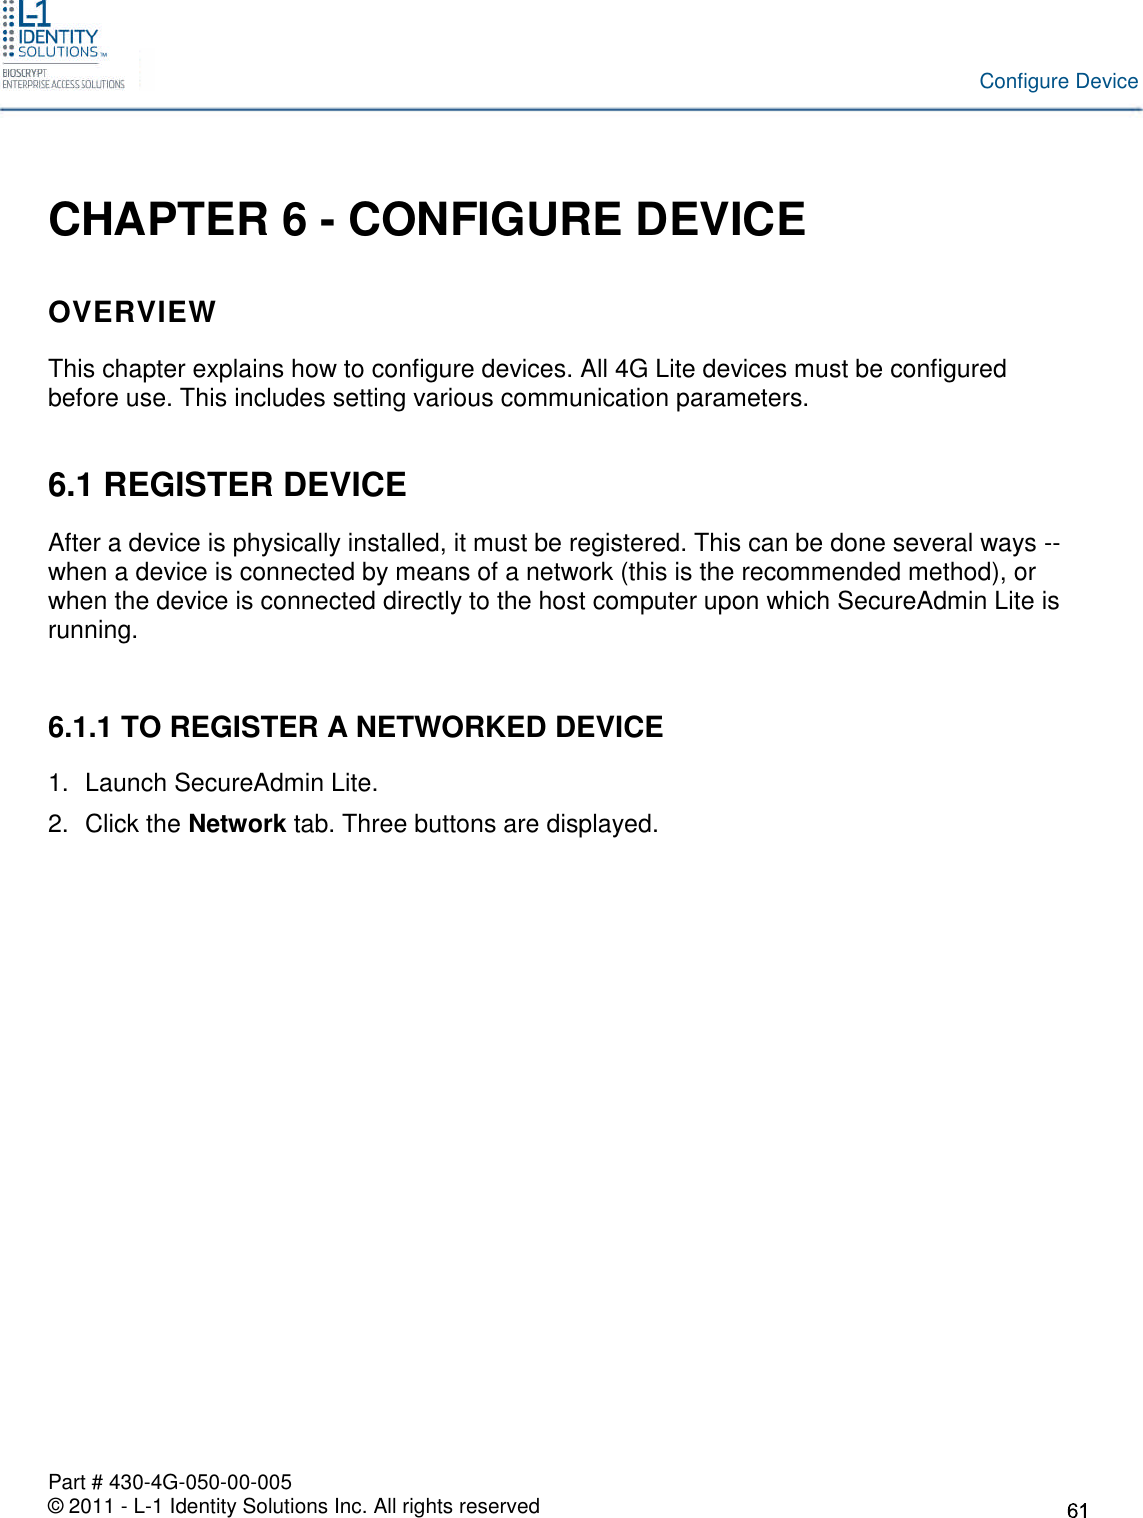 Part # 430-4G-050-00-005© 2011 - L-1 Identity Solutions Inc. All rights reservedConfigure DeviceCHAPTER 6 - CONFIGURE DEVICEOVERVIEWThis chapter explains how to configure devices. All 4G Lite devices must be configuredbefore use. This includes setting various communication parameters.6.1 REGISTER DEVICEAfter a device is physically installed, it must be registered. This can be done several ways --when a device is connected by means of a network (this is the recommended method), orwhen the device is connected directly to the host computer upon which SecureAdmin Lite isrunning.6.1.1 TO REGISTER A NETWORKED DEVICE1. Launch SecureAdmin Lite.2. Click the Network tab. Three buttons are displayed.